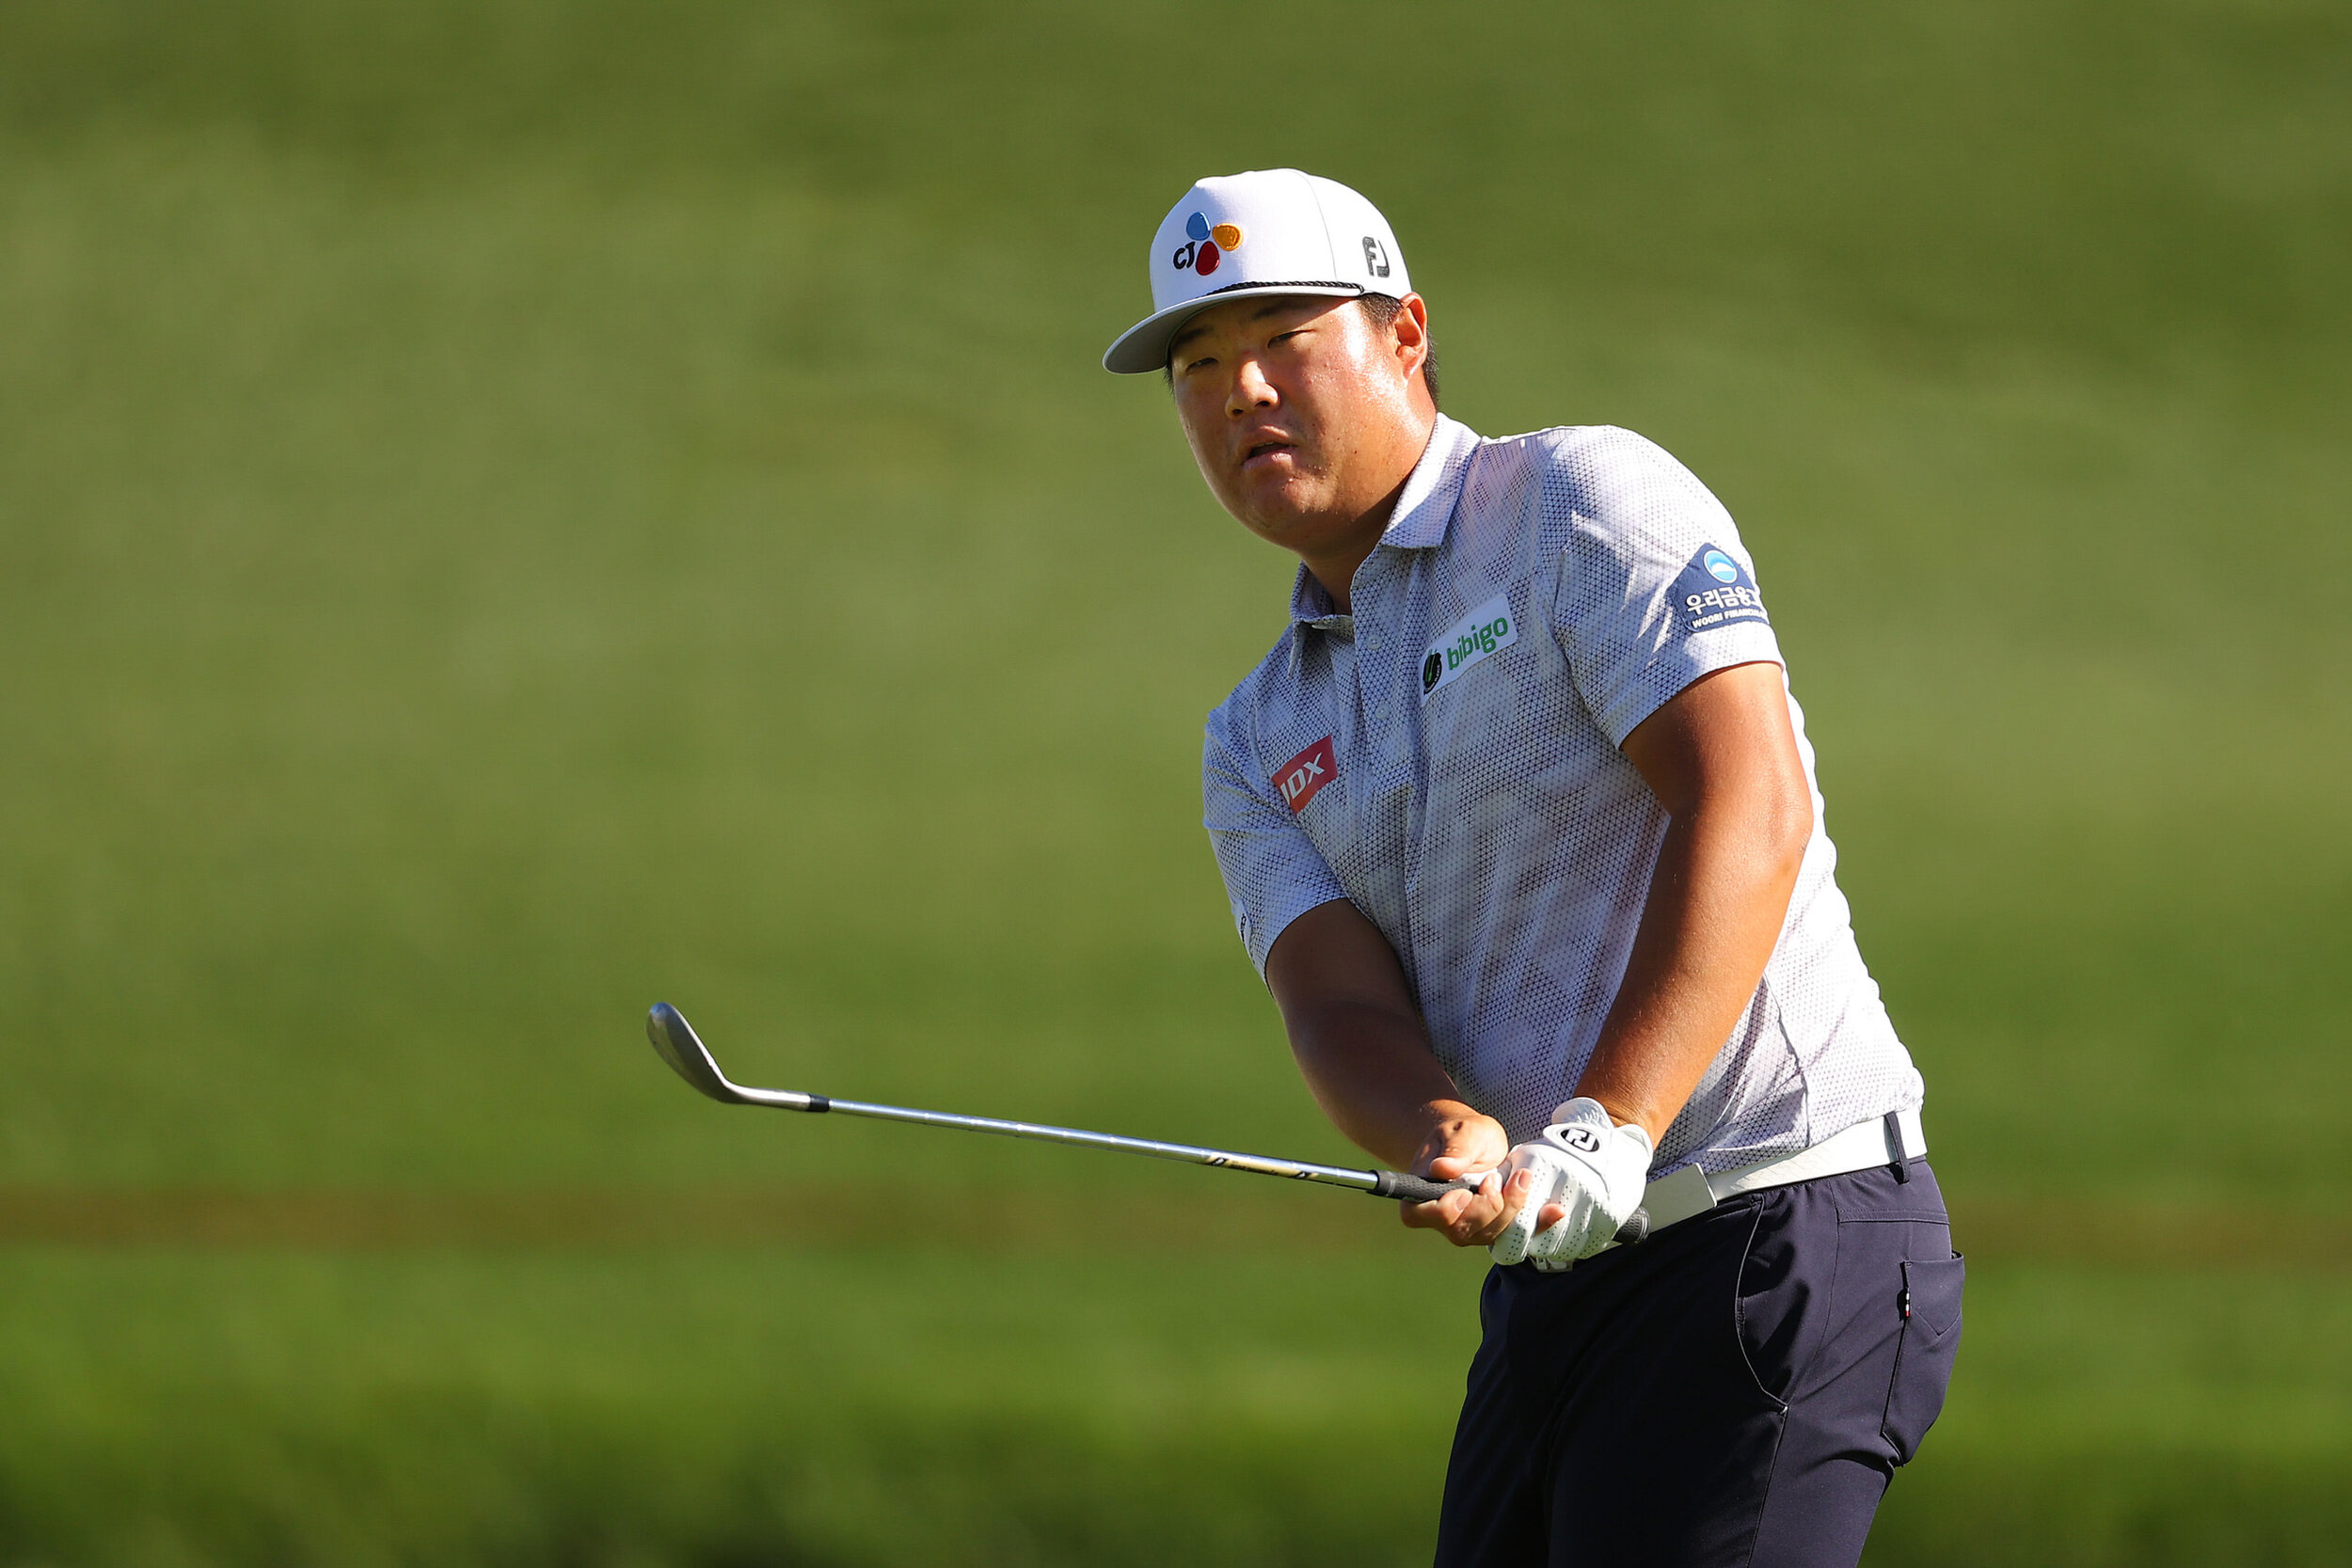  PONTE VEDRA BEACH, FLORIDA - MARCH 12: Sungjae Im of Korea chips on the third green during the second round of THE PLAYERS Championship on THE PLAYERS Stadium Course at TPC Sawgrass on March 12, 2021 in Ponte Vedra Beach, Florida. (Photo by Kevin C.